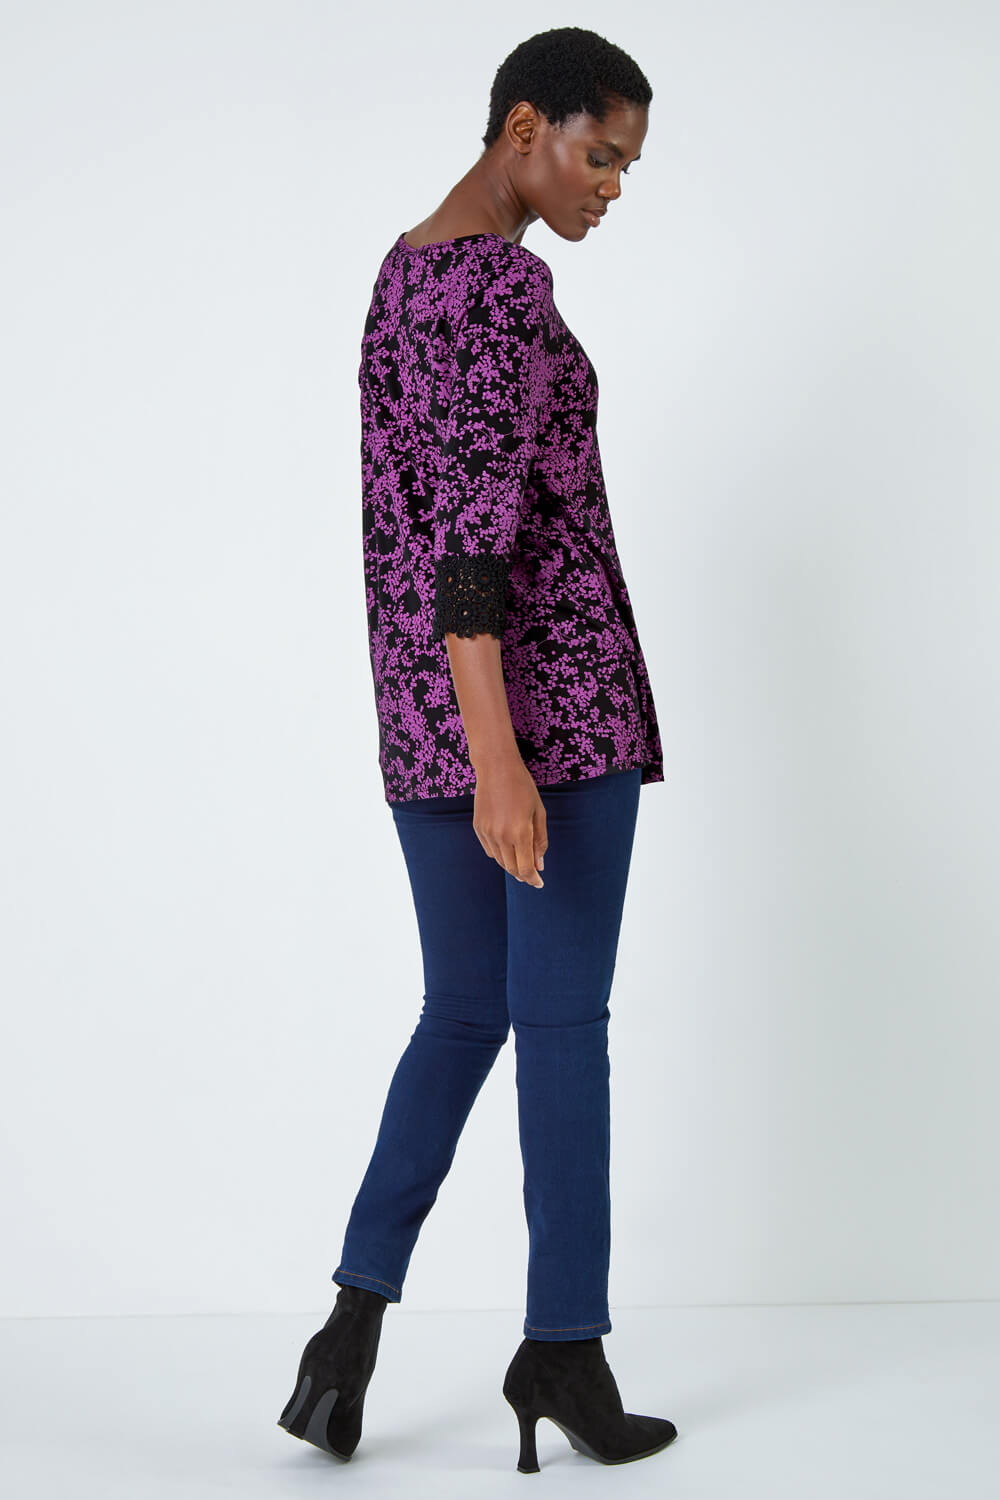 Purple Floral Lace Cuff Stretch Top, Image 3 of 5